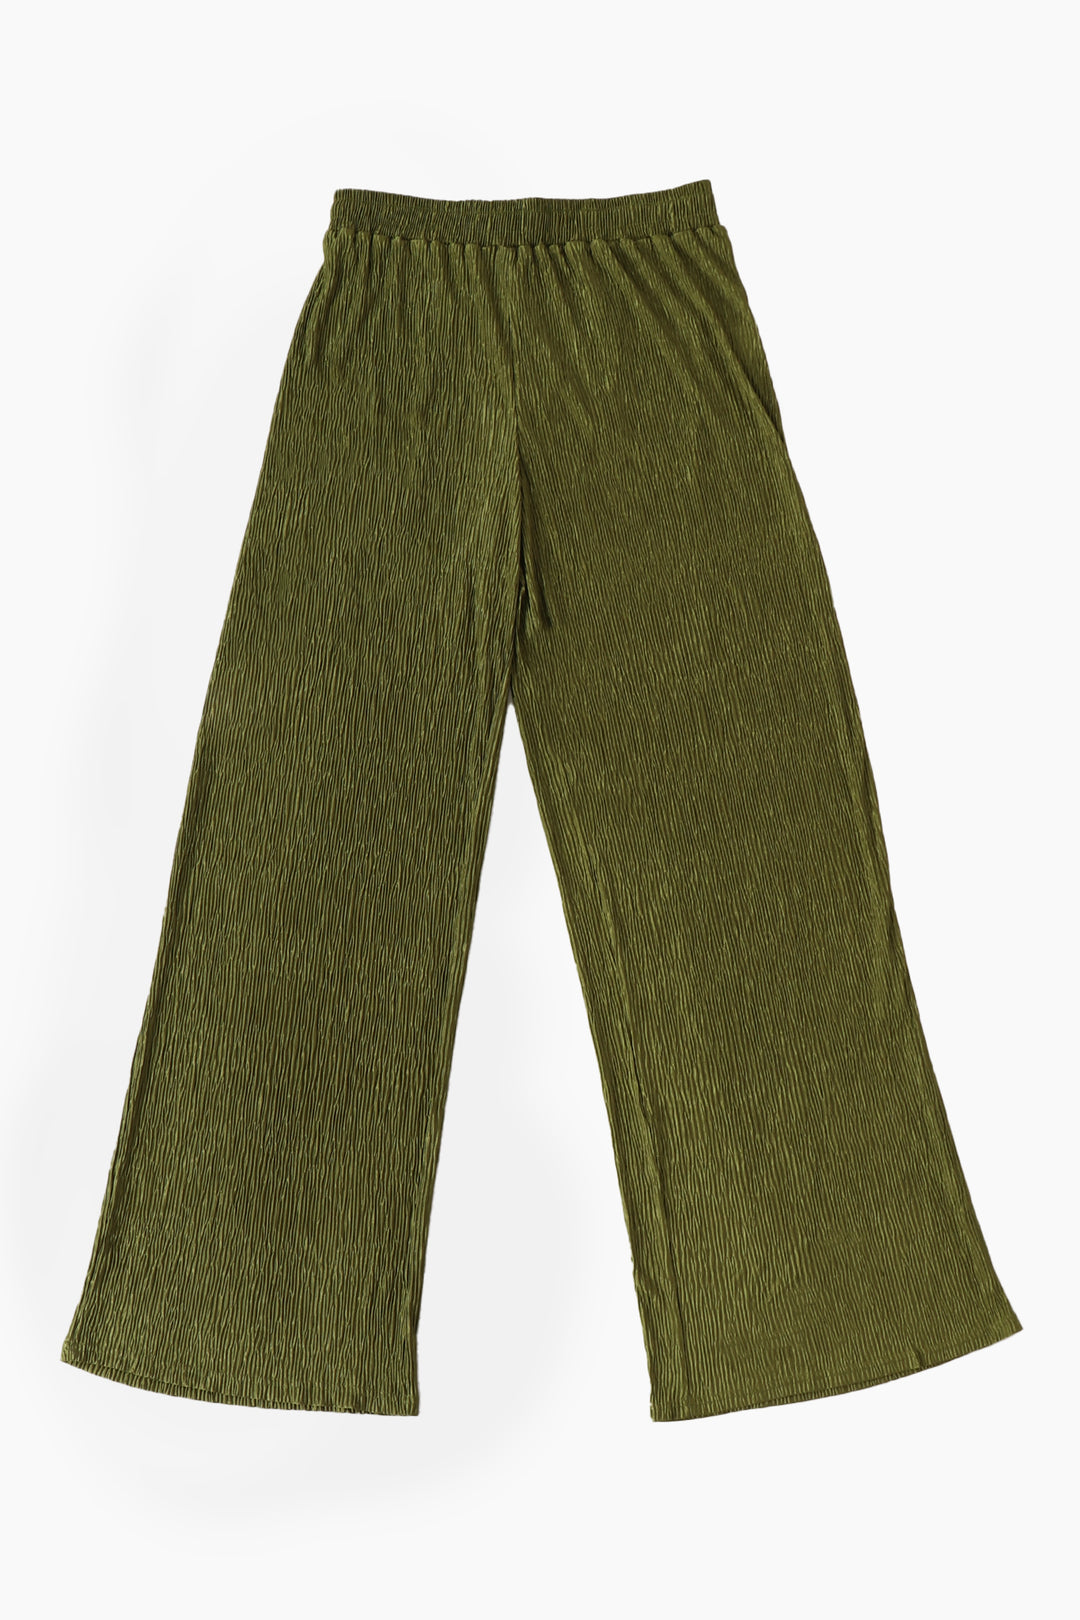 olive green long summer trousers with elasticated waist